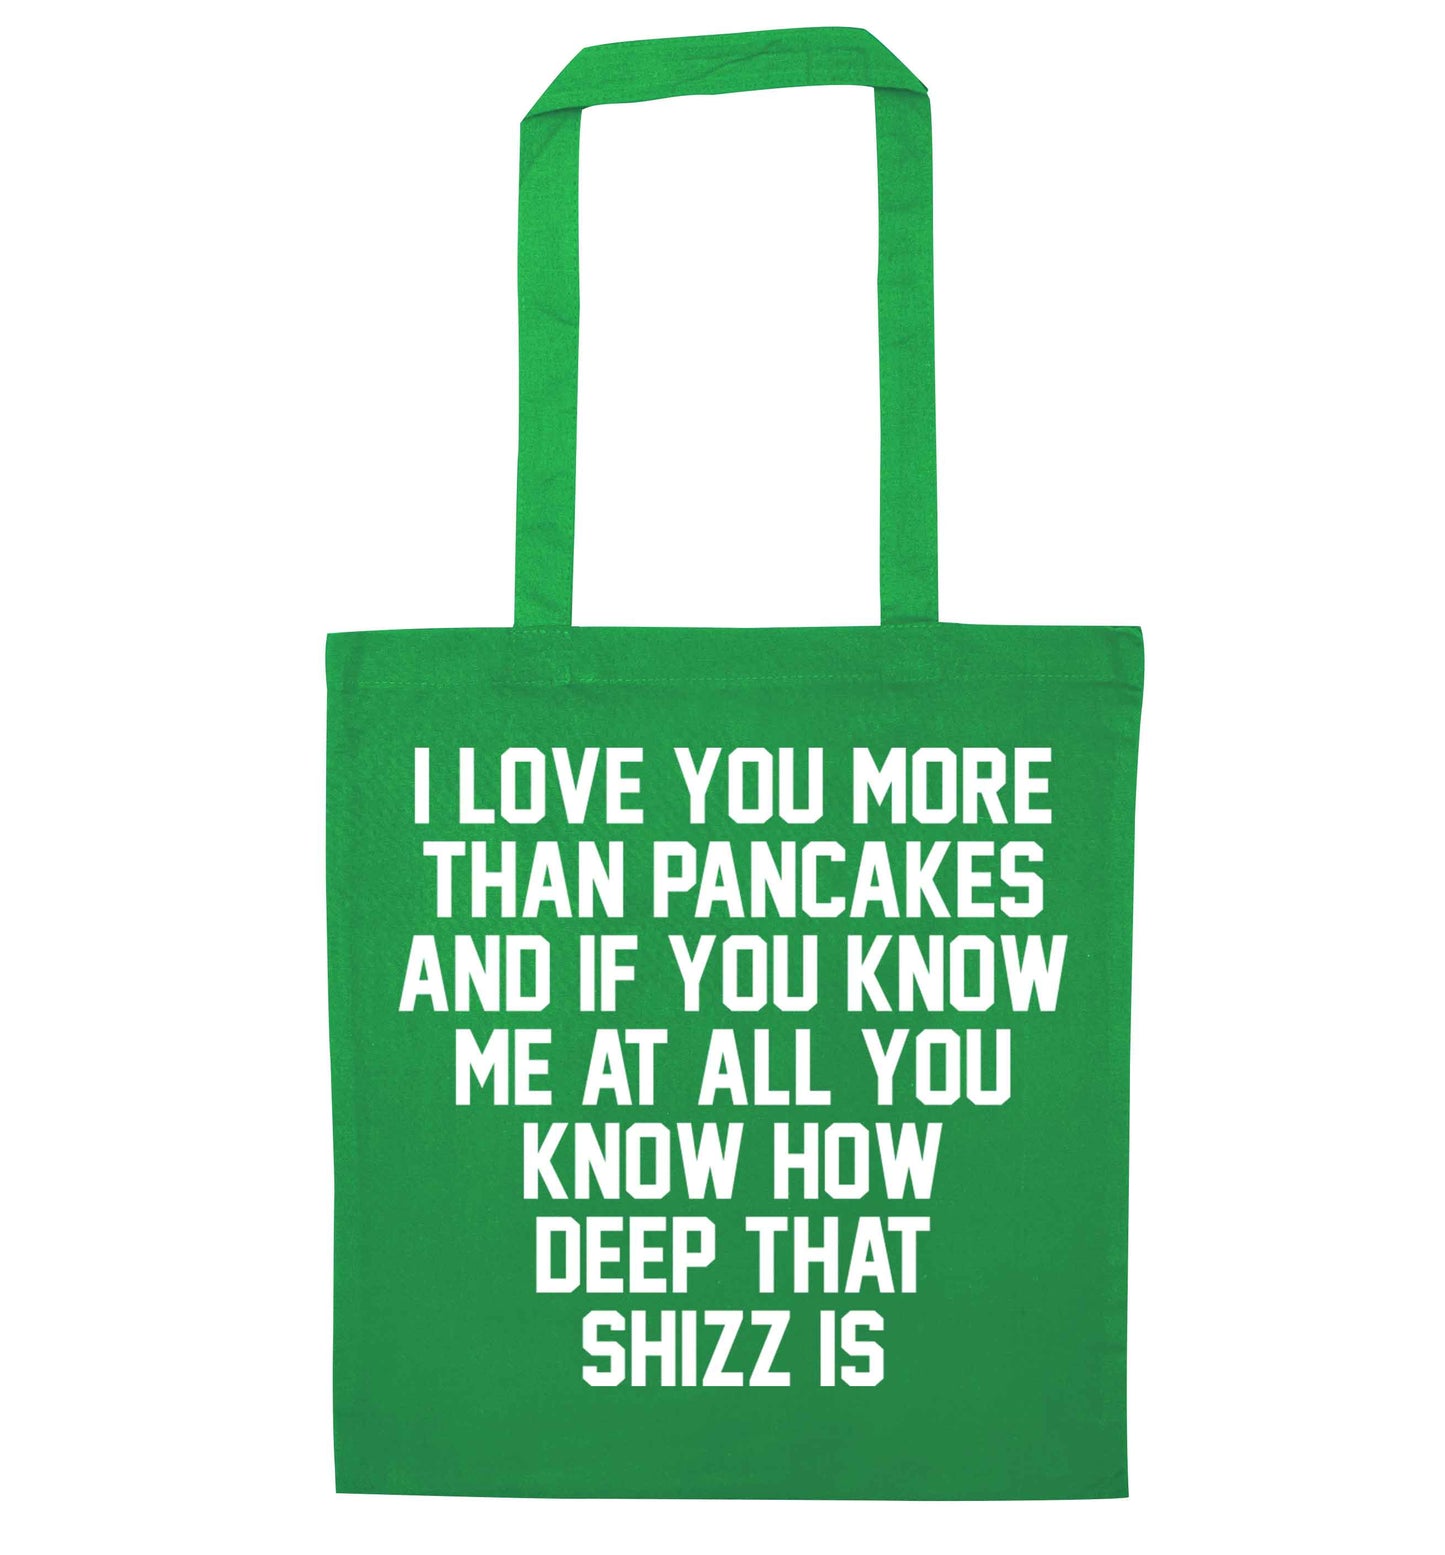 I love you more than pancakes and if you know me at all you know how deep that shizz is green tote bag